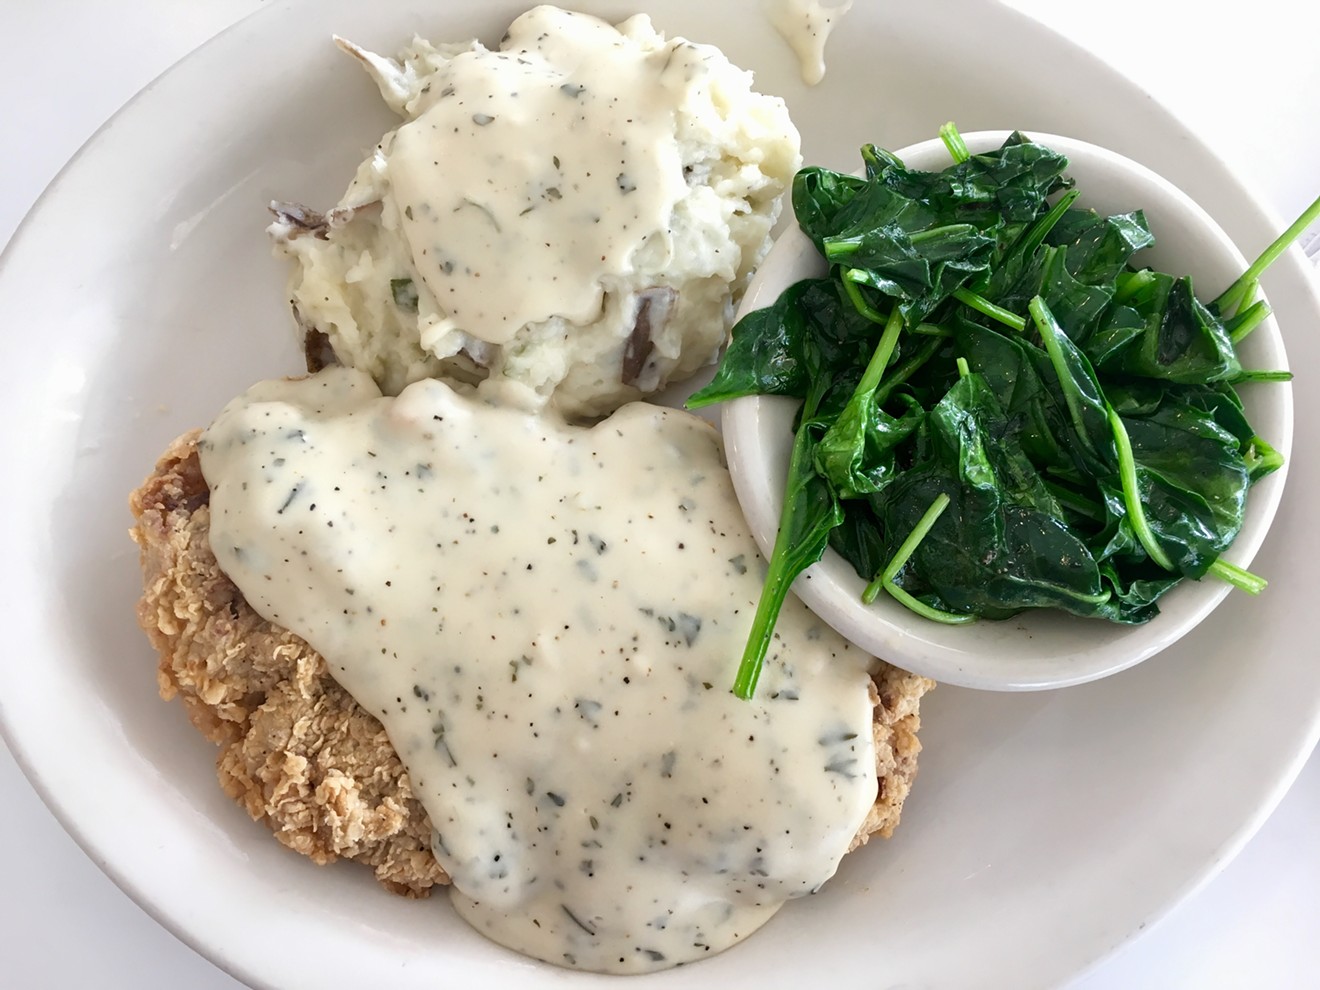 For less than 11 bucks, a chicken-fried steak, spinach from Oak Hill Farms in Poteet, Texas, and delicious mashed potatoes with red-eye gravy.